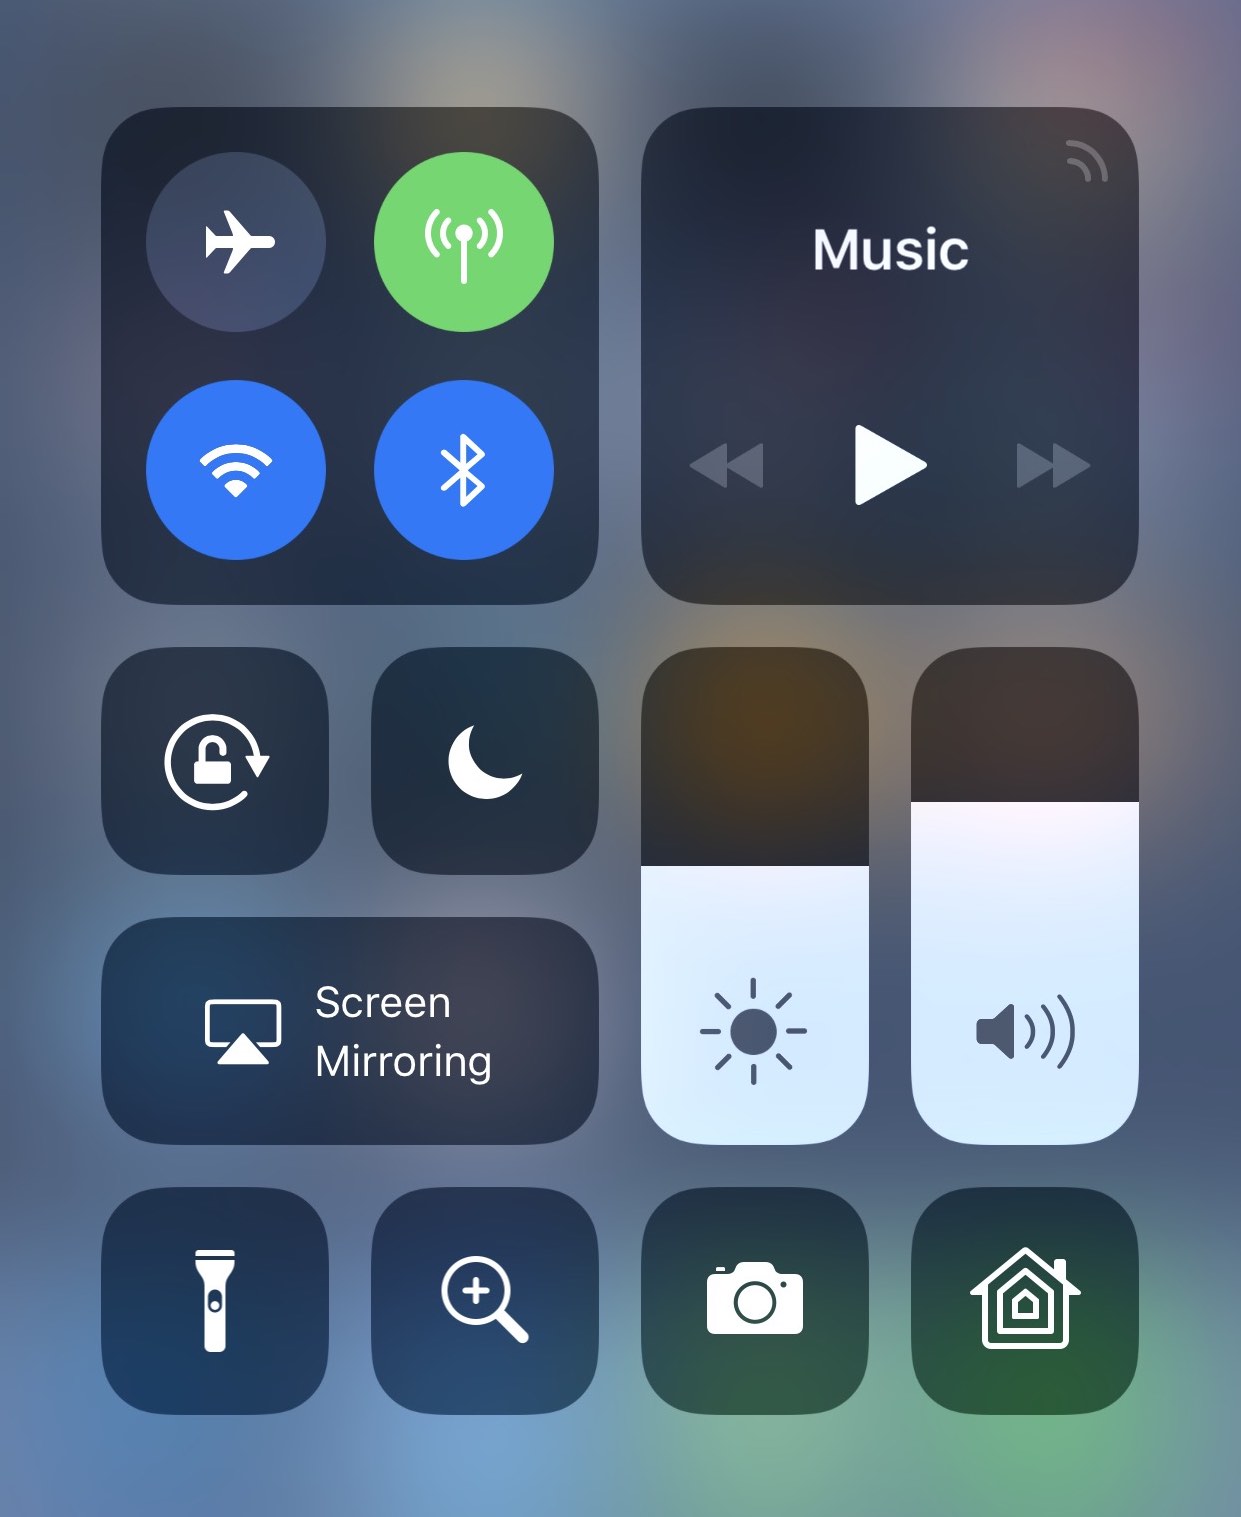  The Camera app is also available in Control Center 